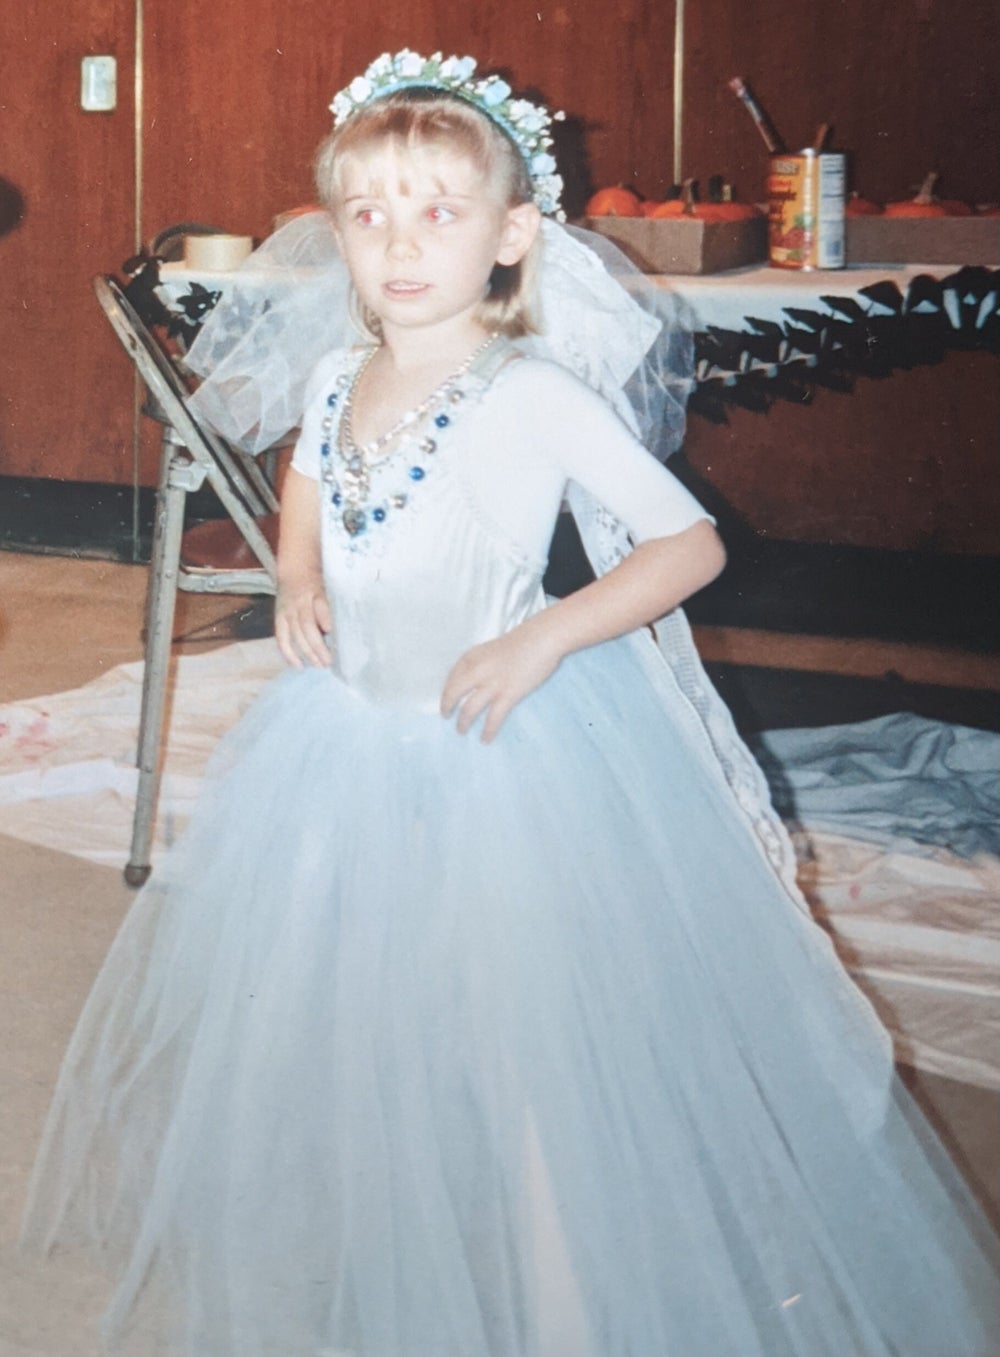 Dressed up as a princess when Princess Astraea was just an imaginary friend (Collect/PA Real Life)